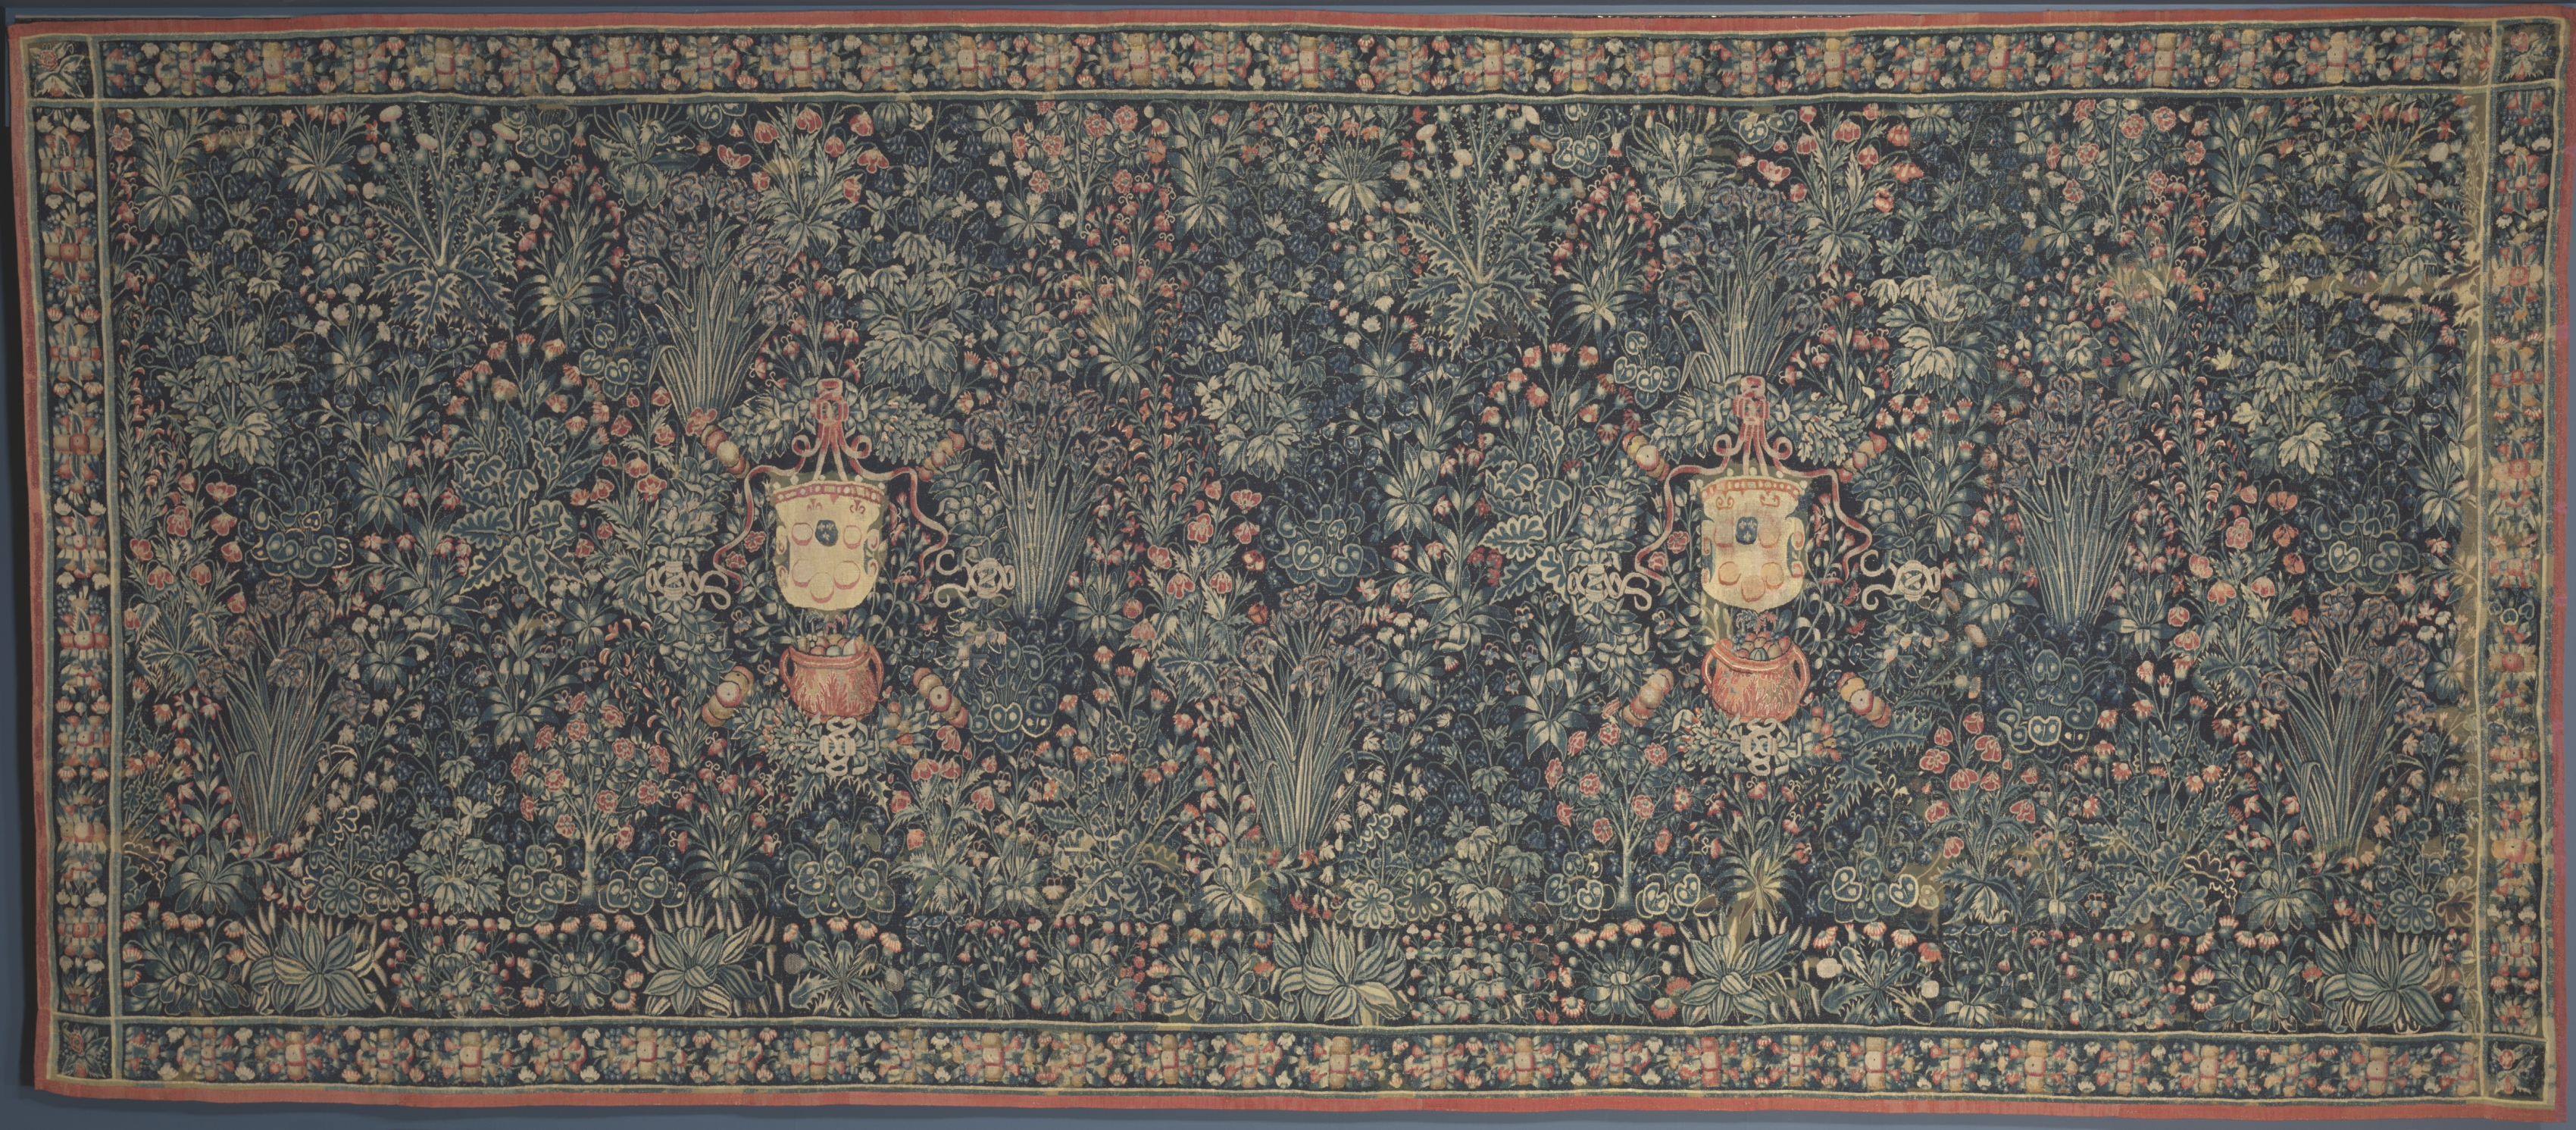 Millefleurs Tapestry with Medici Coat of Arms